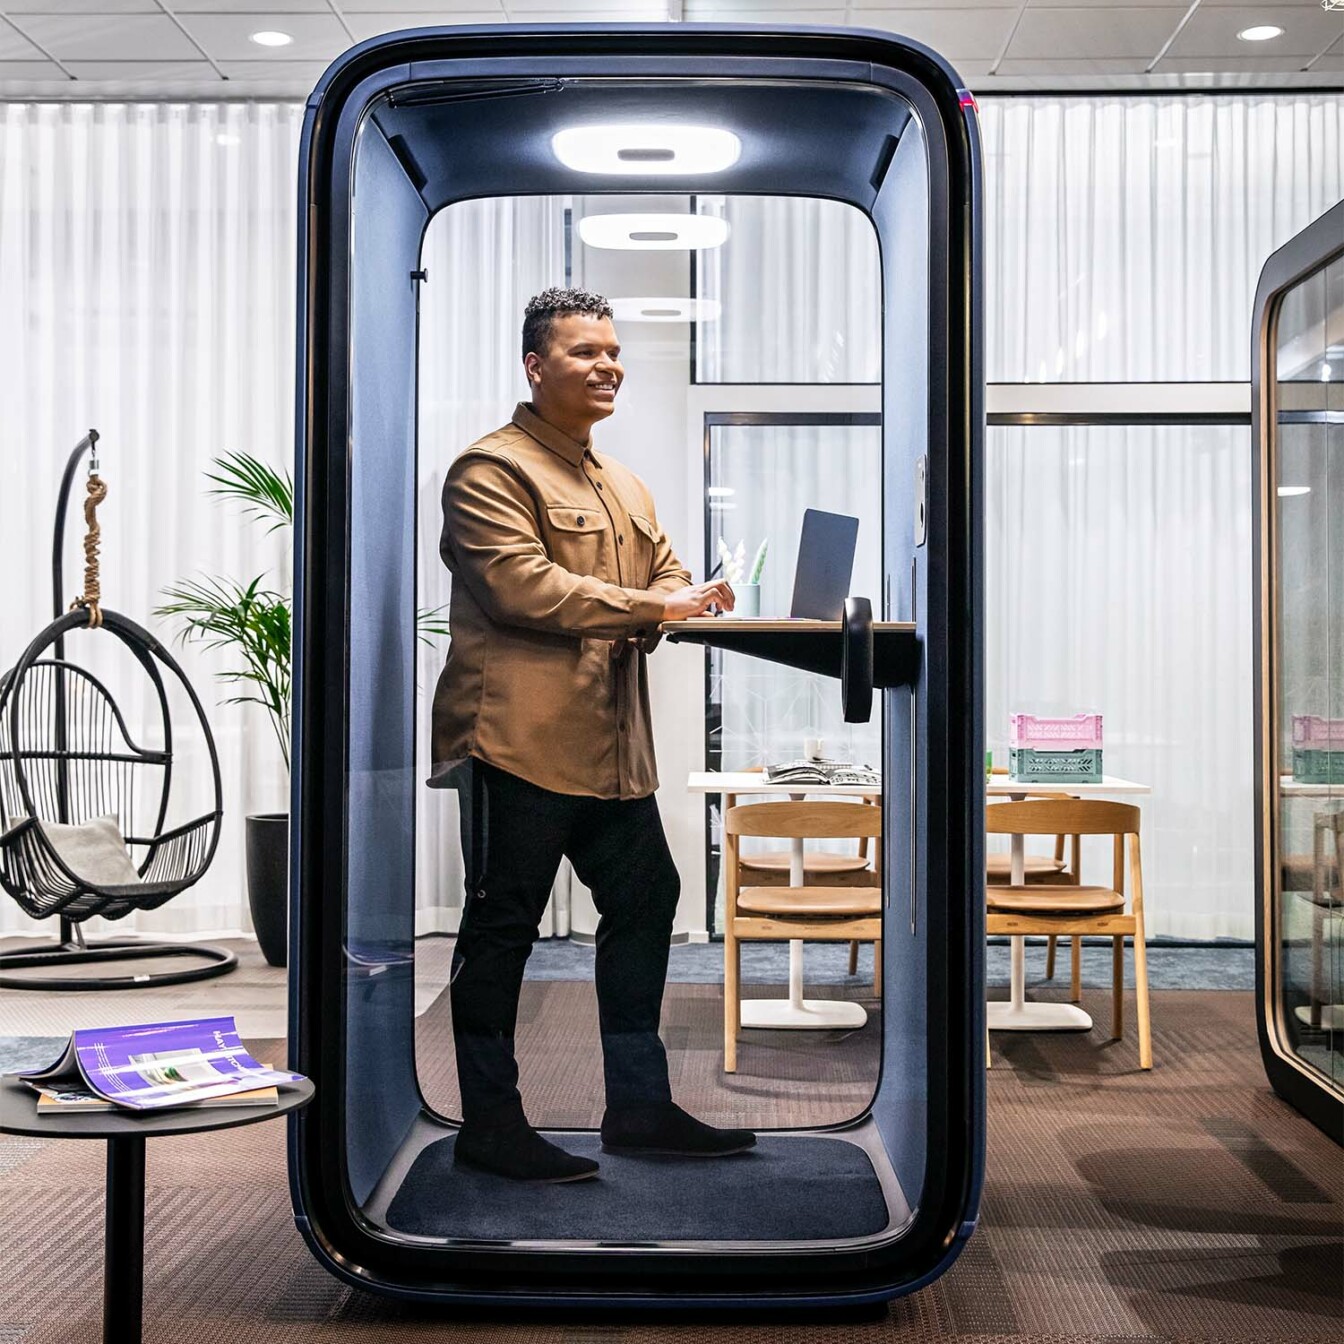 A person smiling and working in a Framery One office pod.